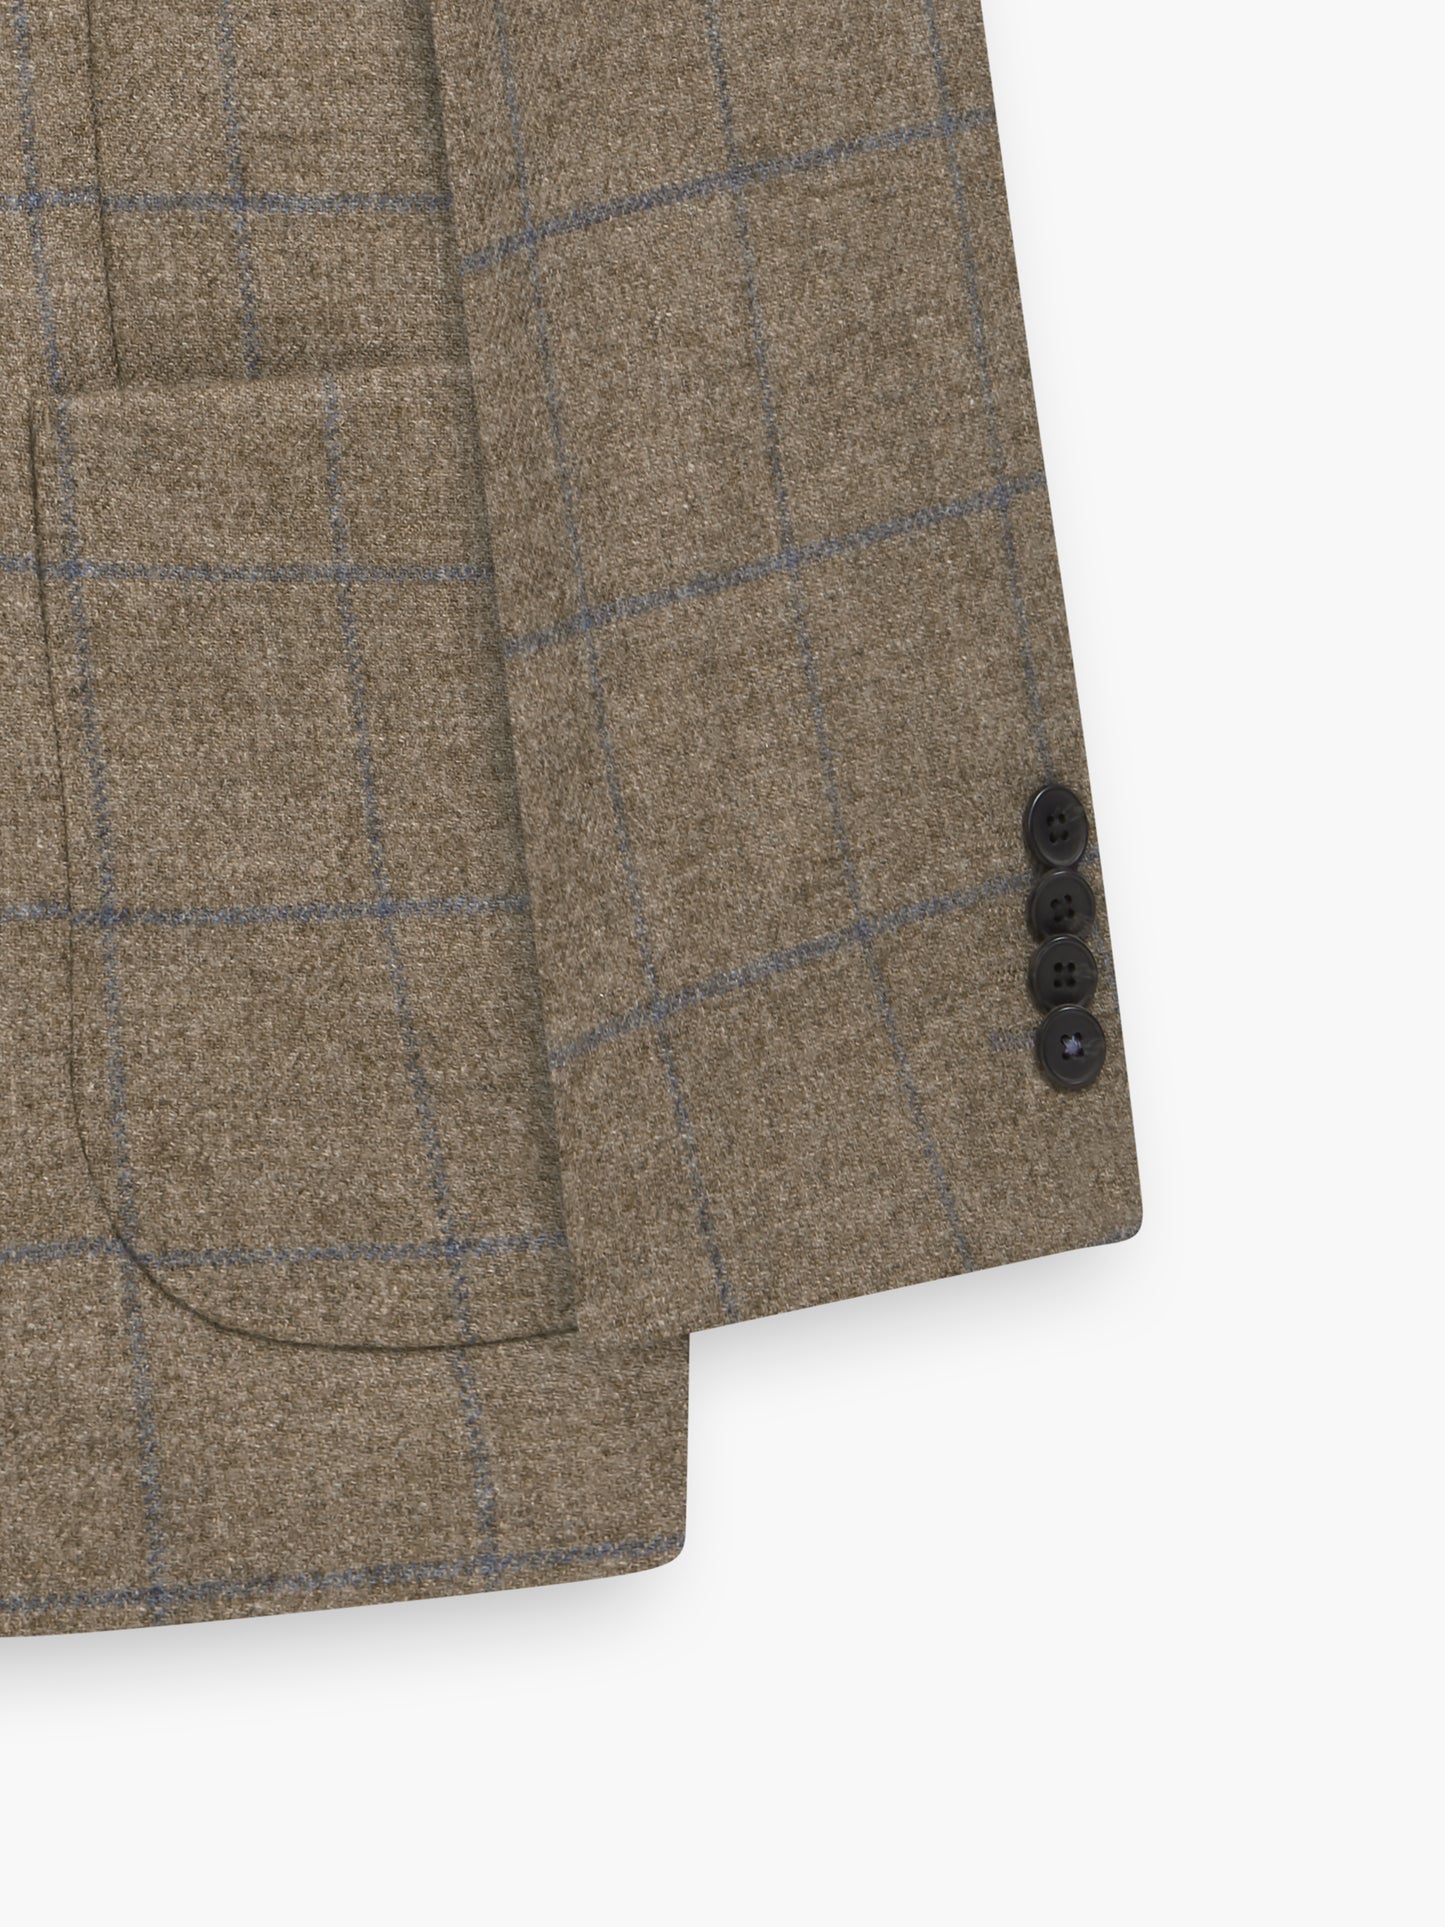 Olivier Slim Fit Jacket in Blue and Neutral Robert Noble Mill Wool Check